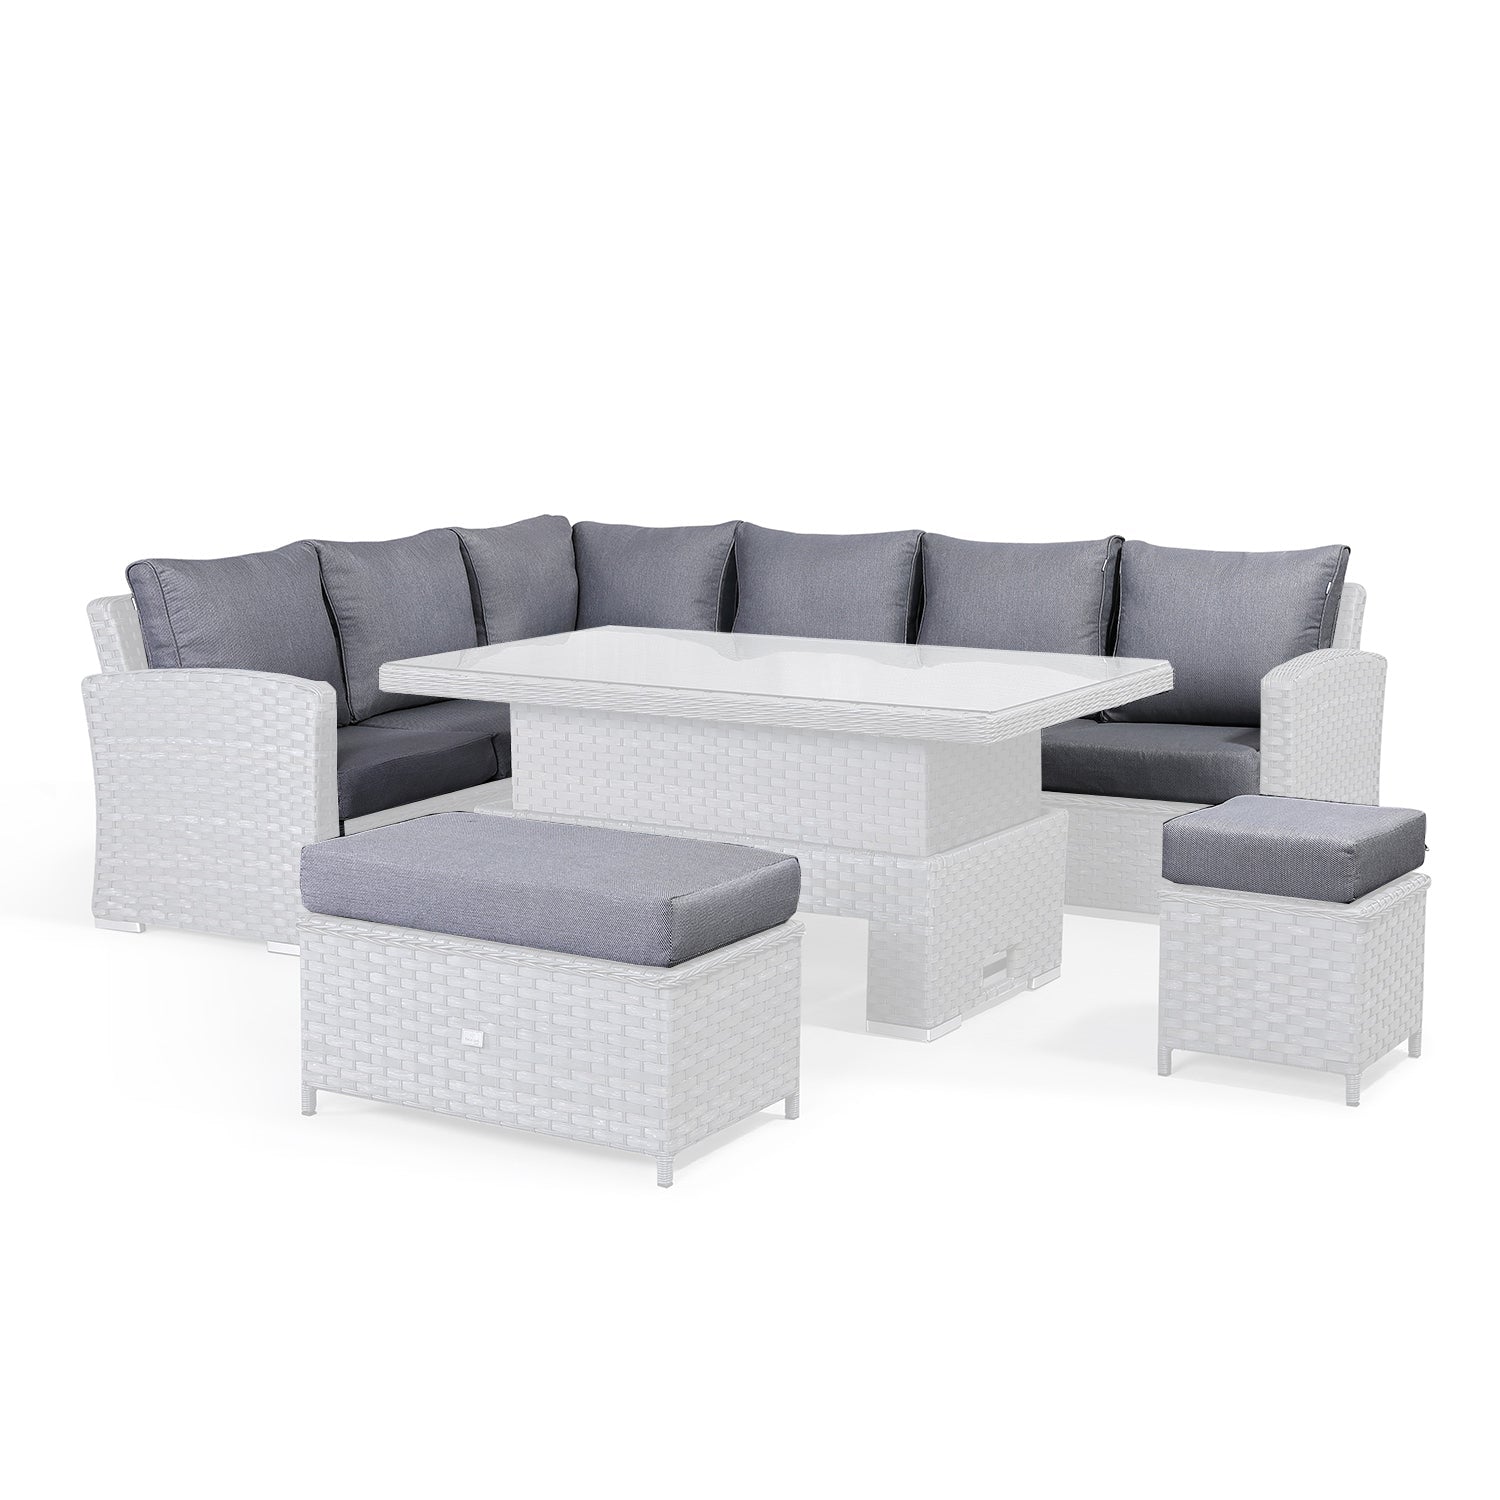 Replacement Cushion Covers in Grey for Victoria High Back Large MODULAR Corner Sofa Set ONLY